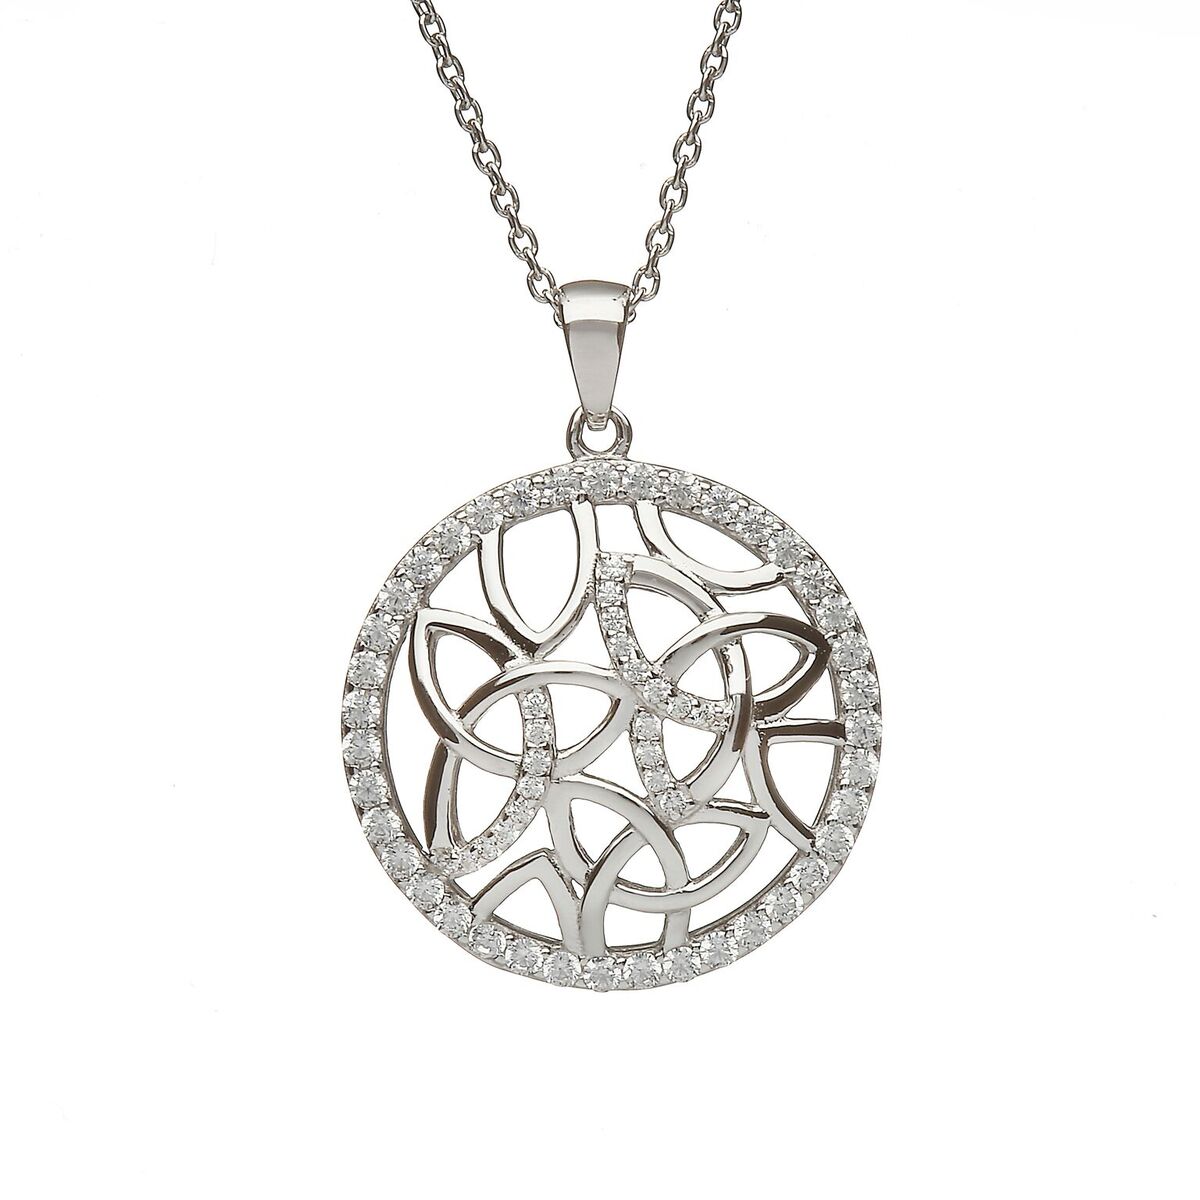 pn97 CELTIC KNOT ROUND SILVER PENDANT PLAIN SOLID STERLING SILVER 